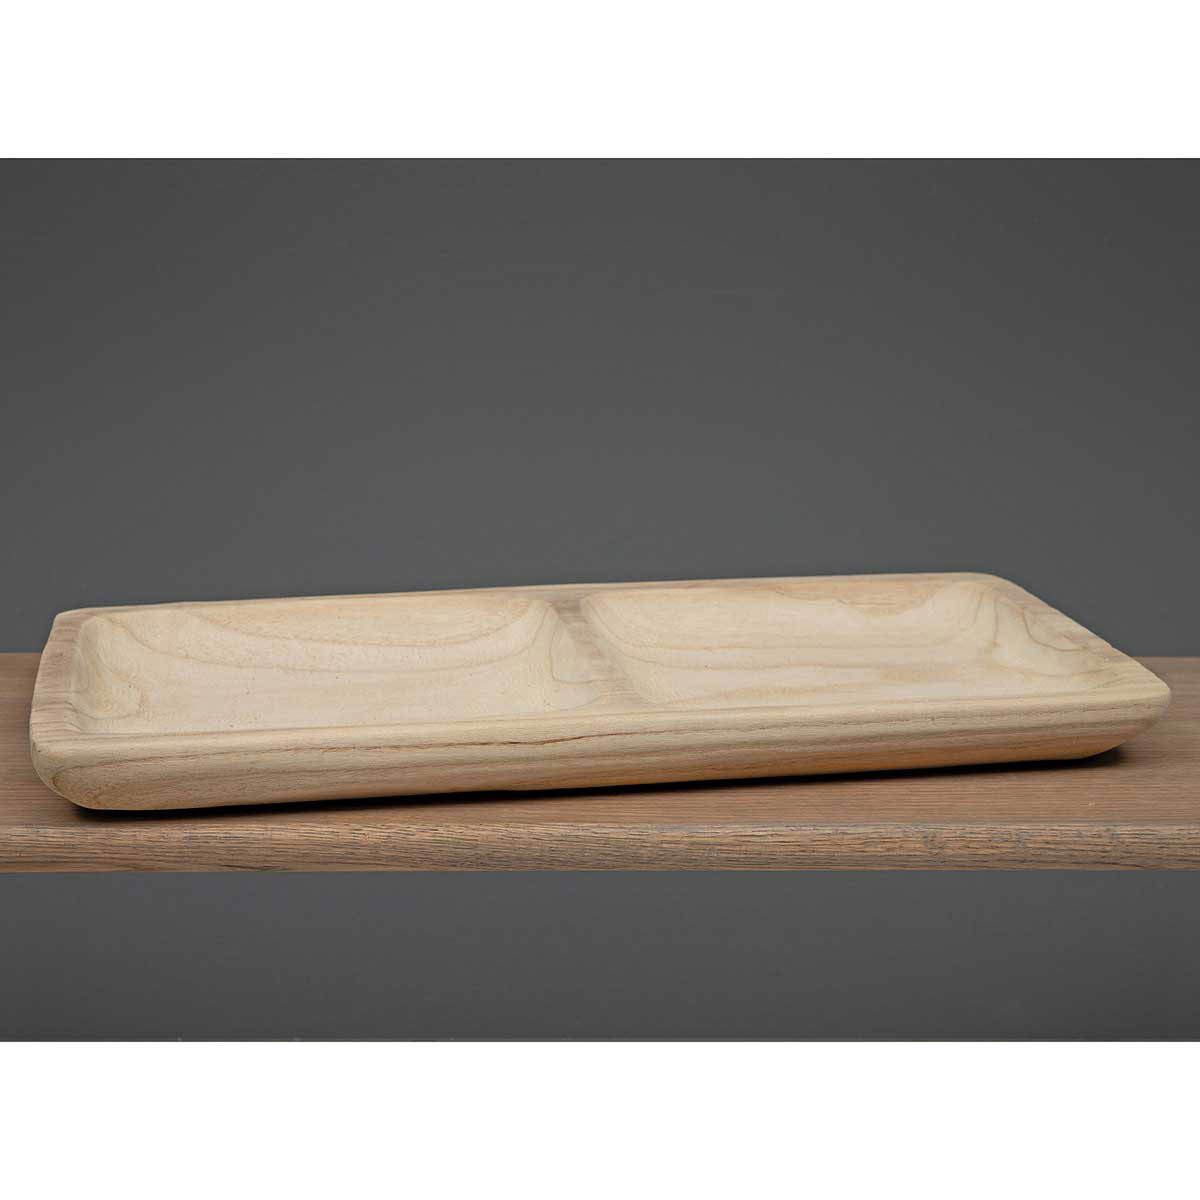 WOOD DOUBLE TRAY NATURAL 22.75"X10.75"X1.75"